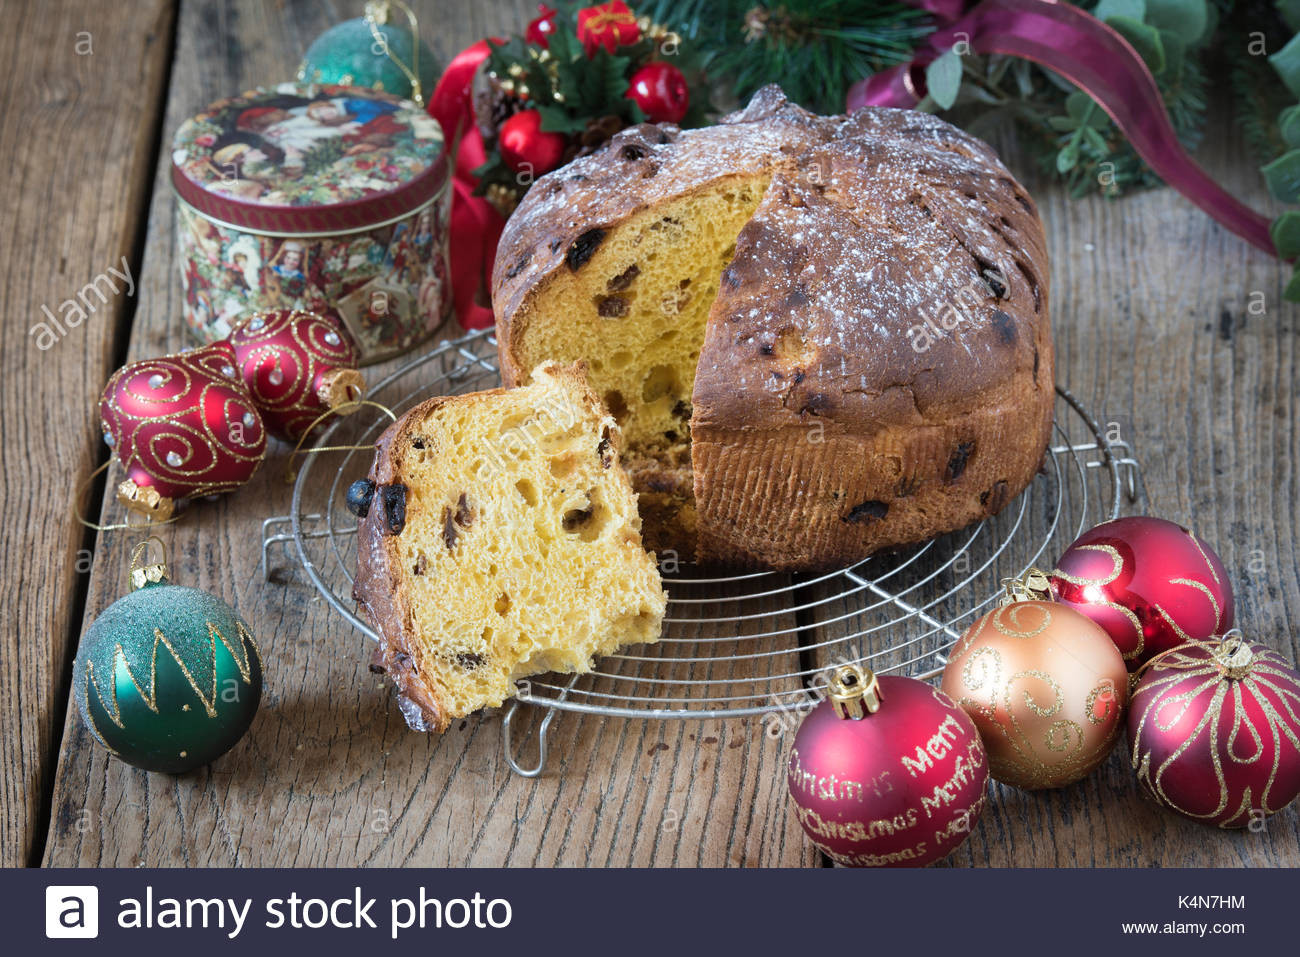 Italian Sweet Bread Loaf Made For Christmas
 Italy Christmas Stock s & Italy Christmas Stock